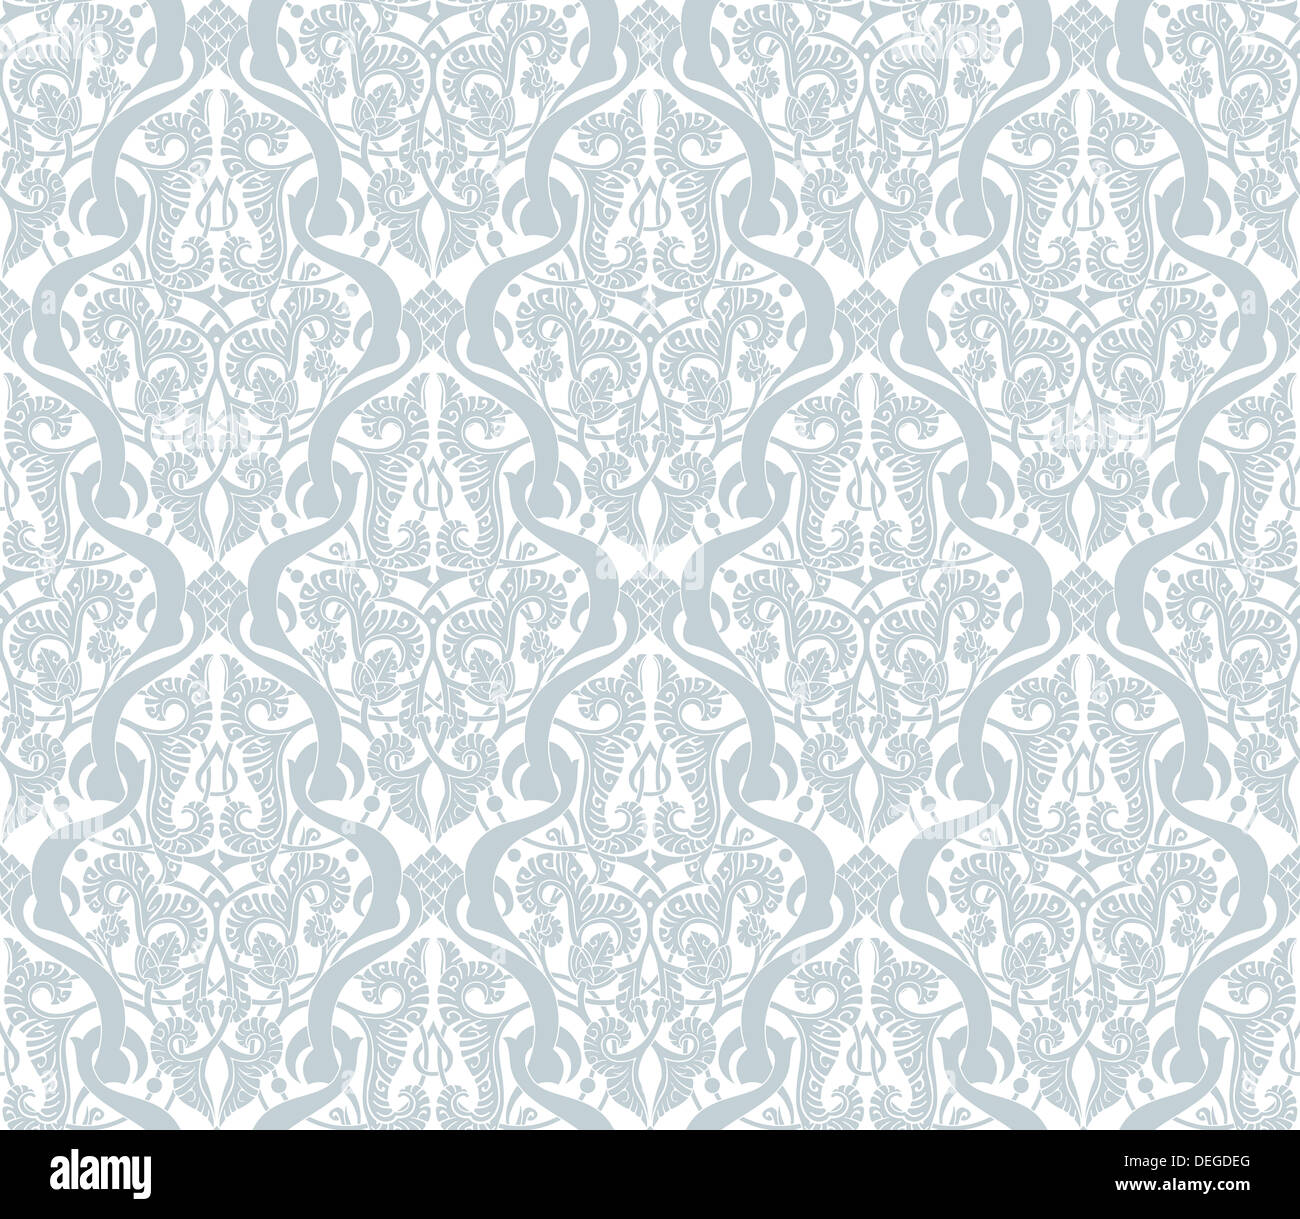 Illustration of an intricate seamlessly tilable repeating vintage Middle Eastern Arabic motif pattern Stock Photo